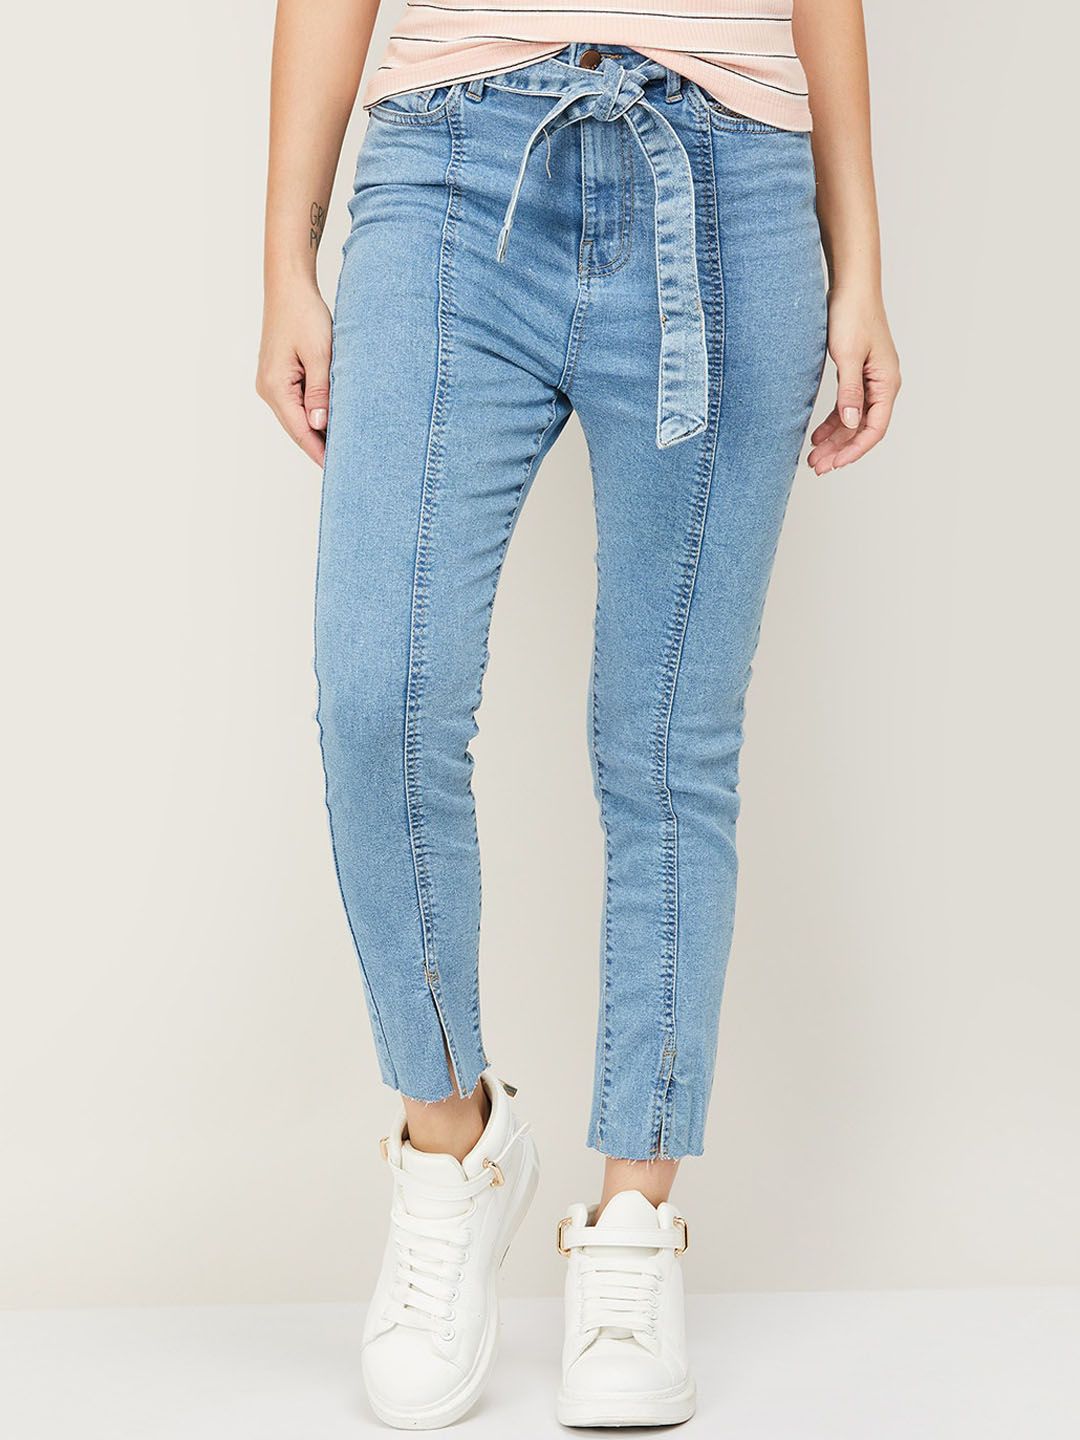 Ginger by Lifestyle Women Blue Jeans Price in India